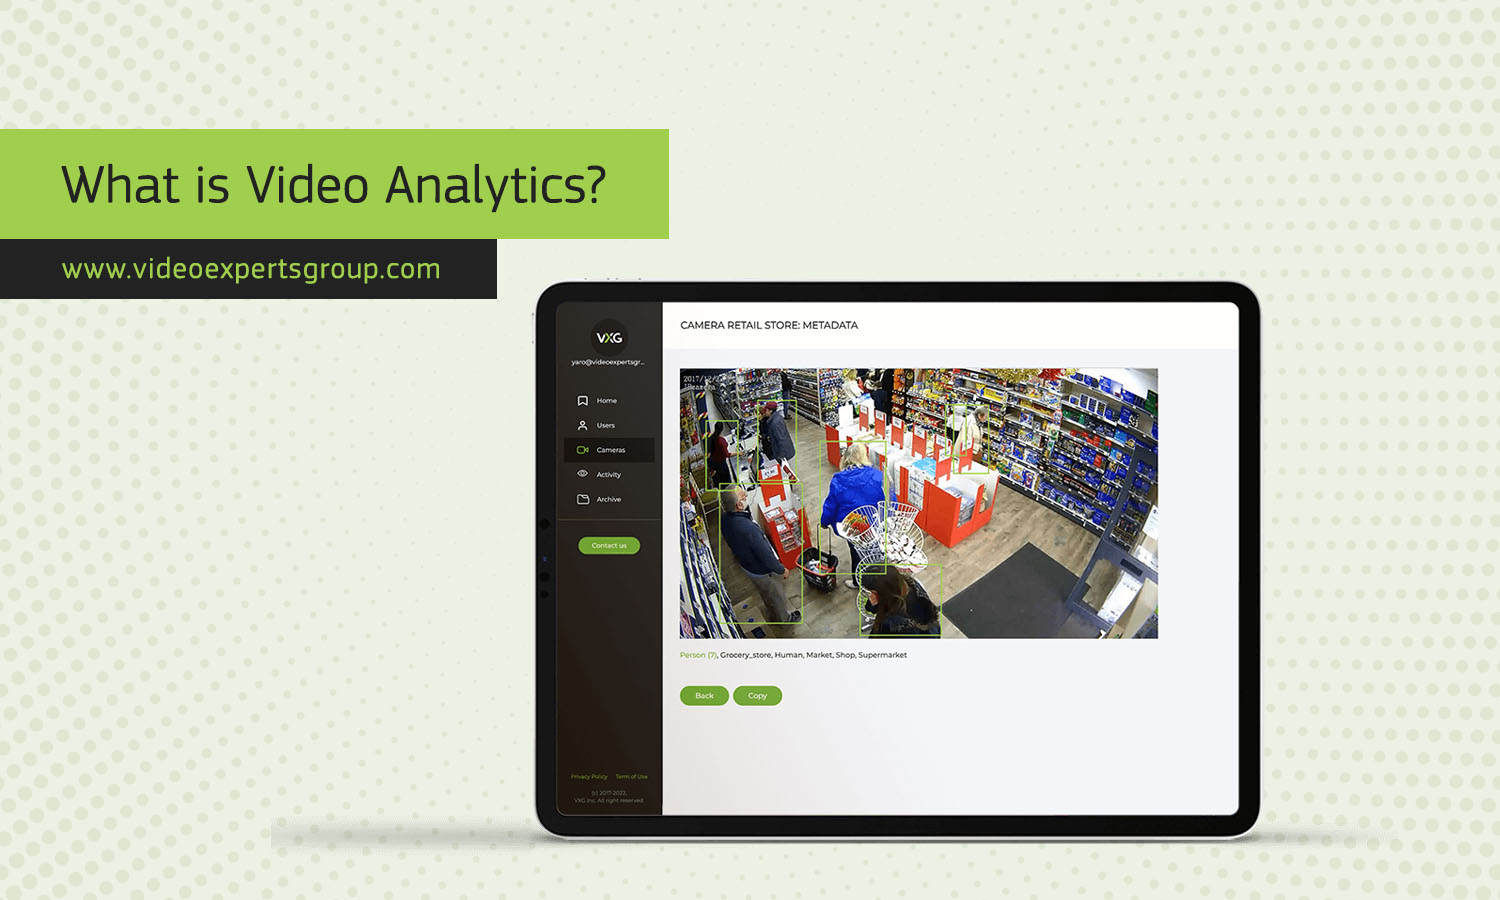 What is Video Analytics?